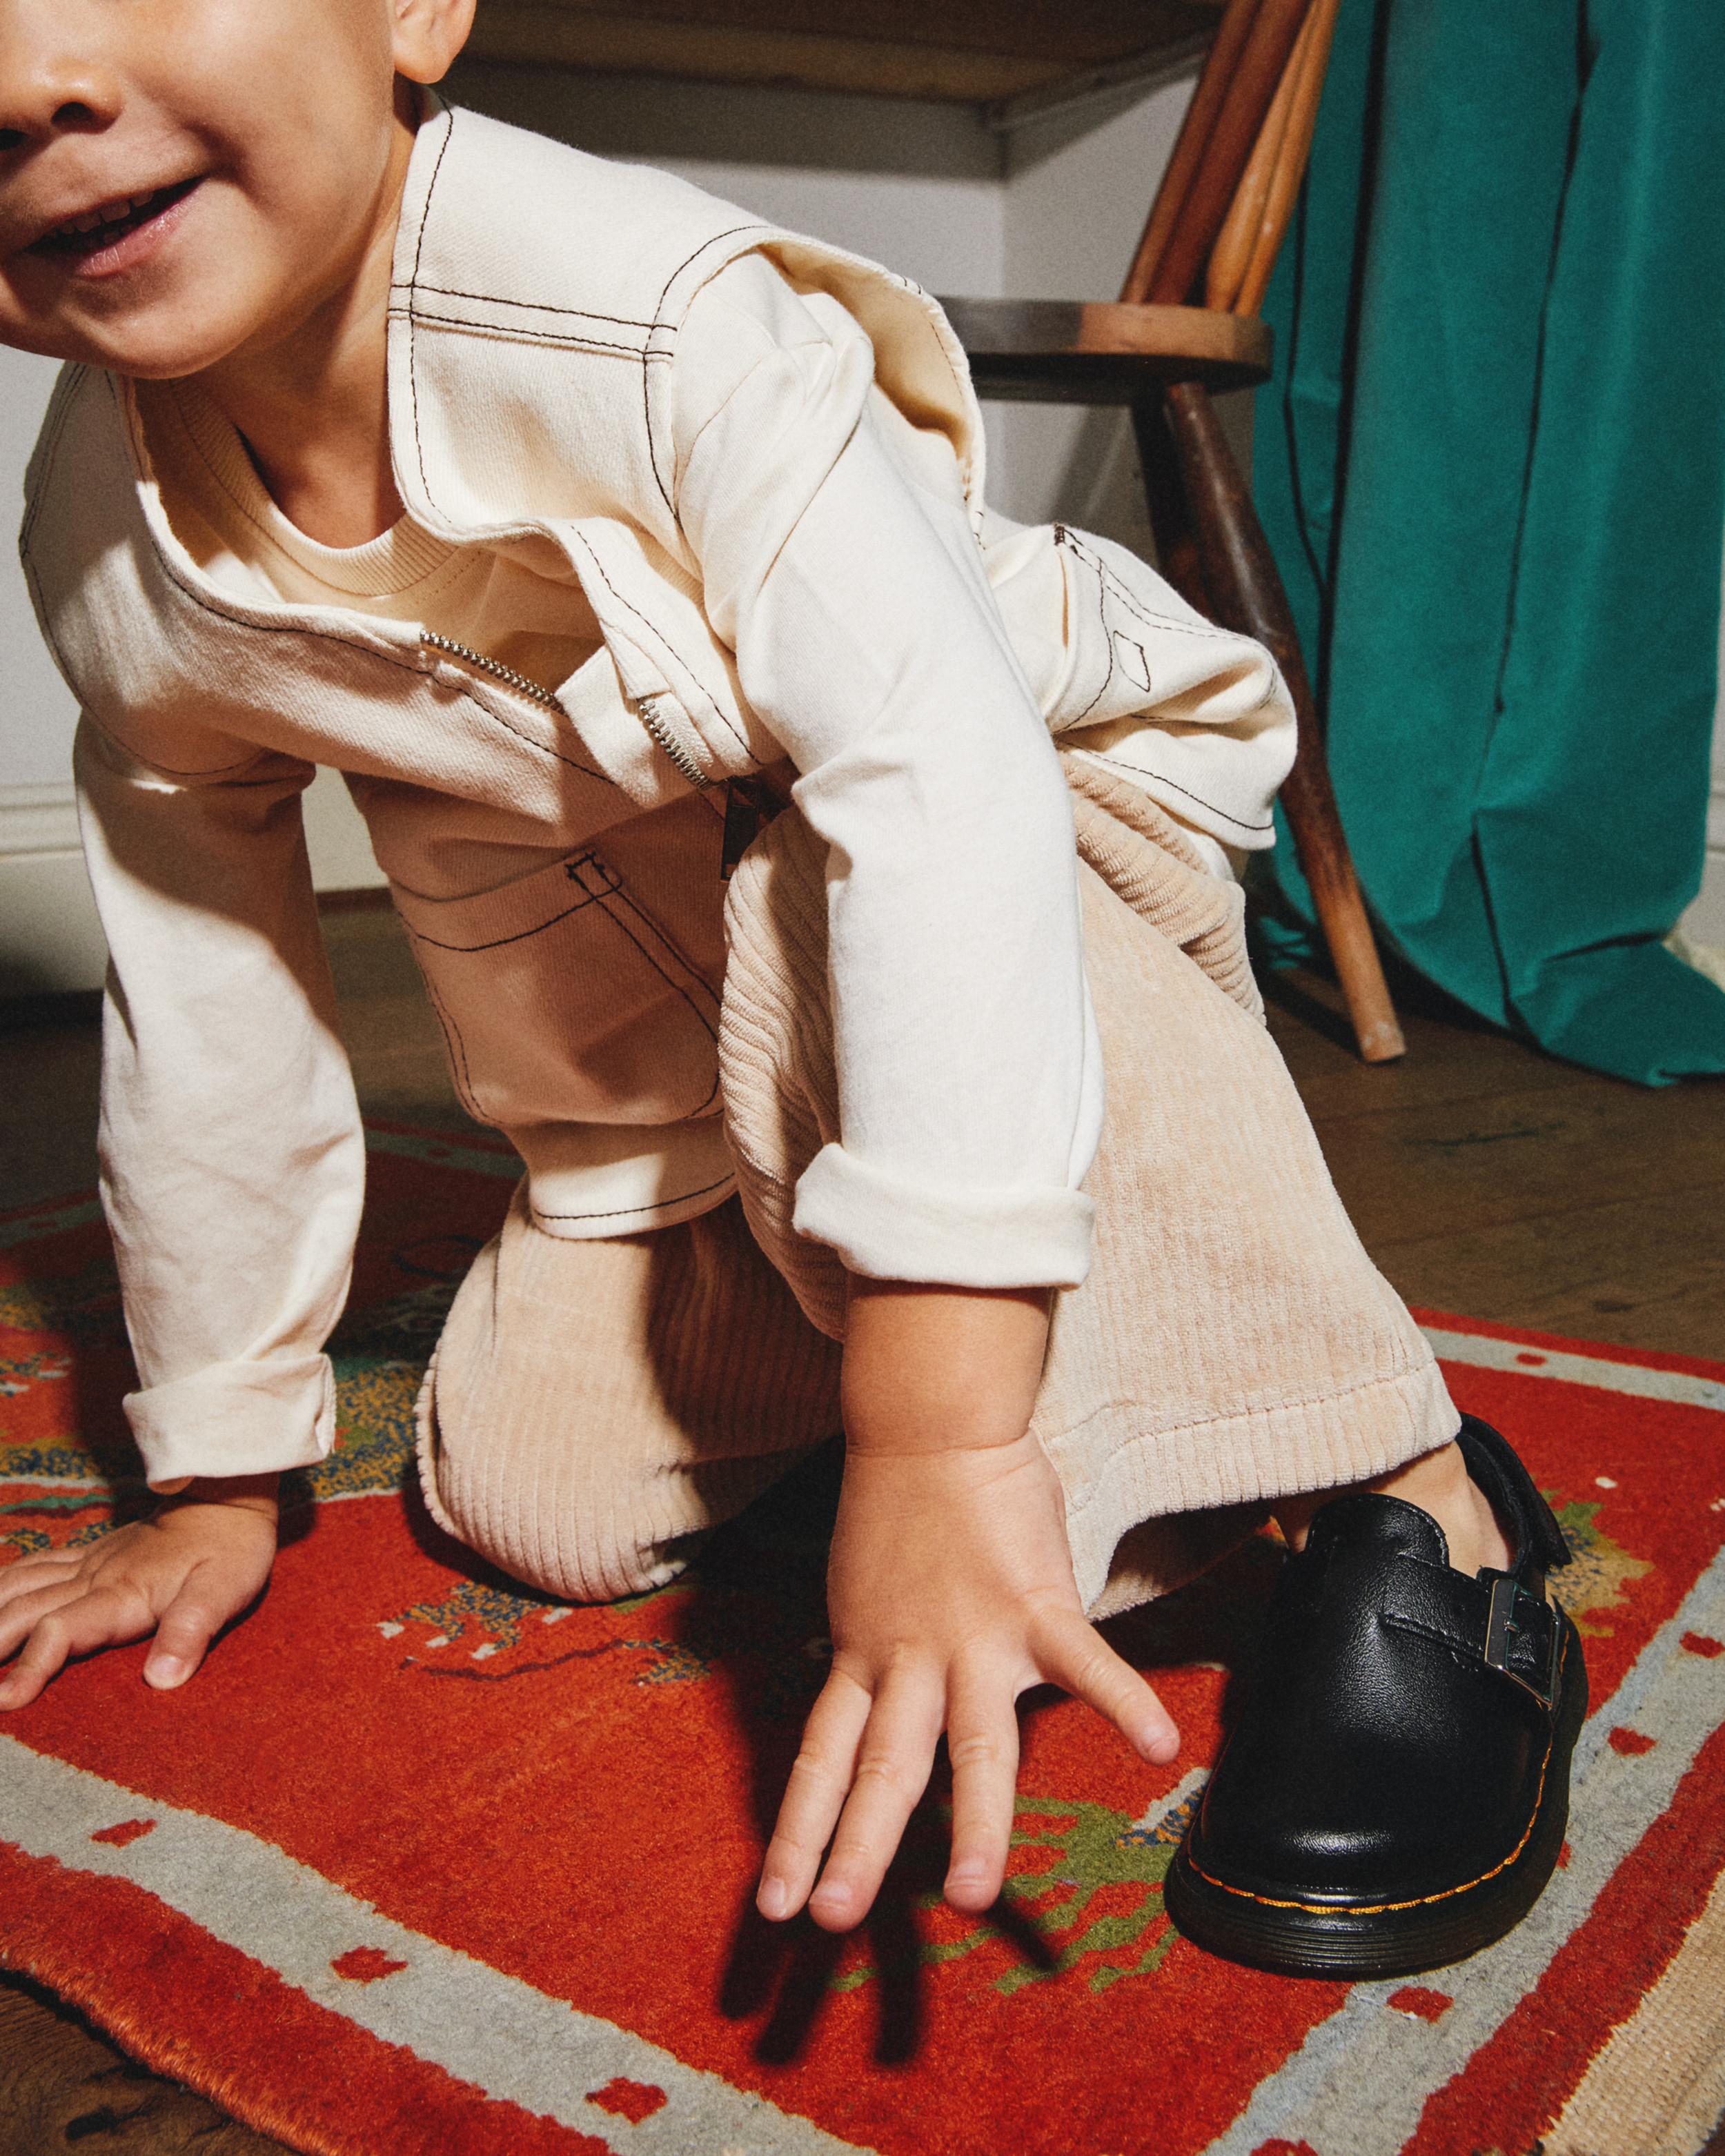 Toddler Jorgie Leather Mules in Black